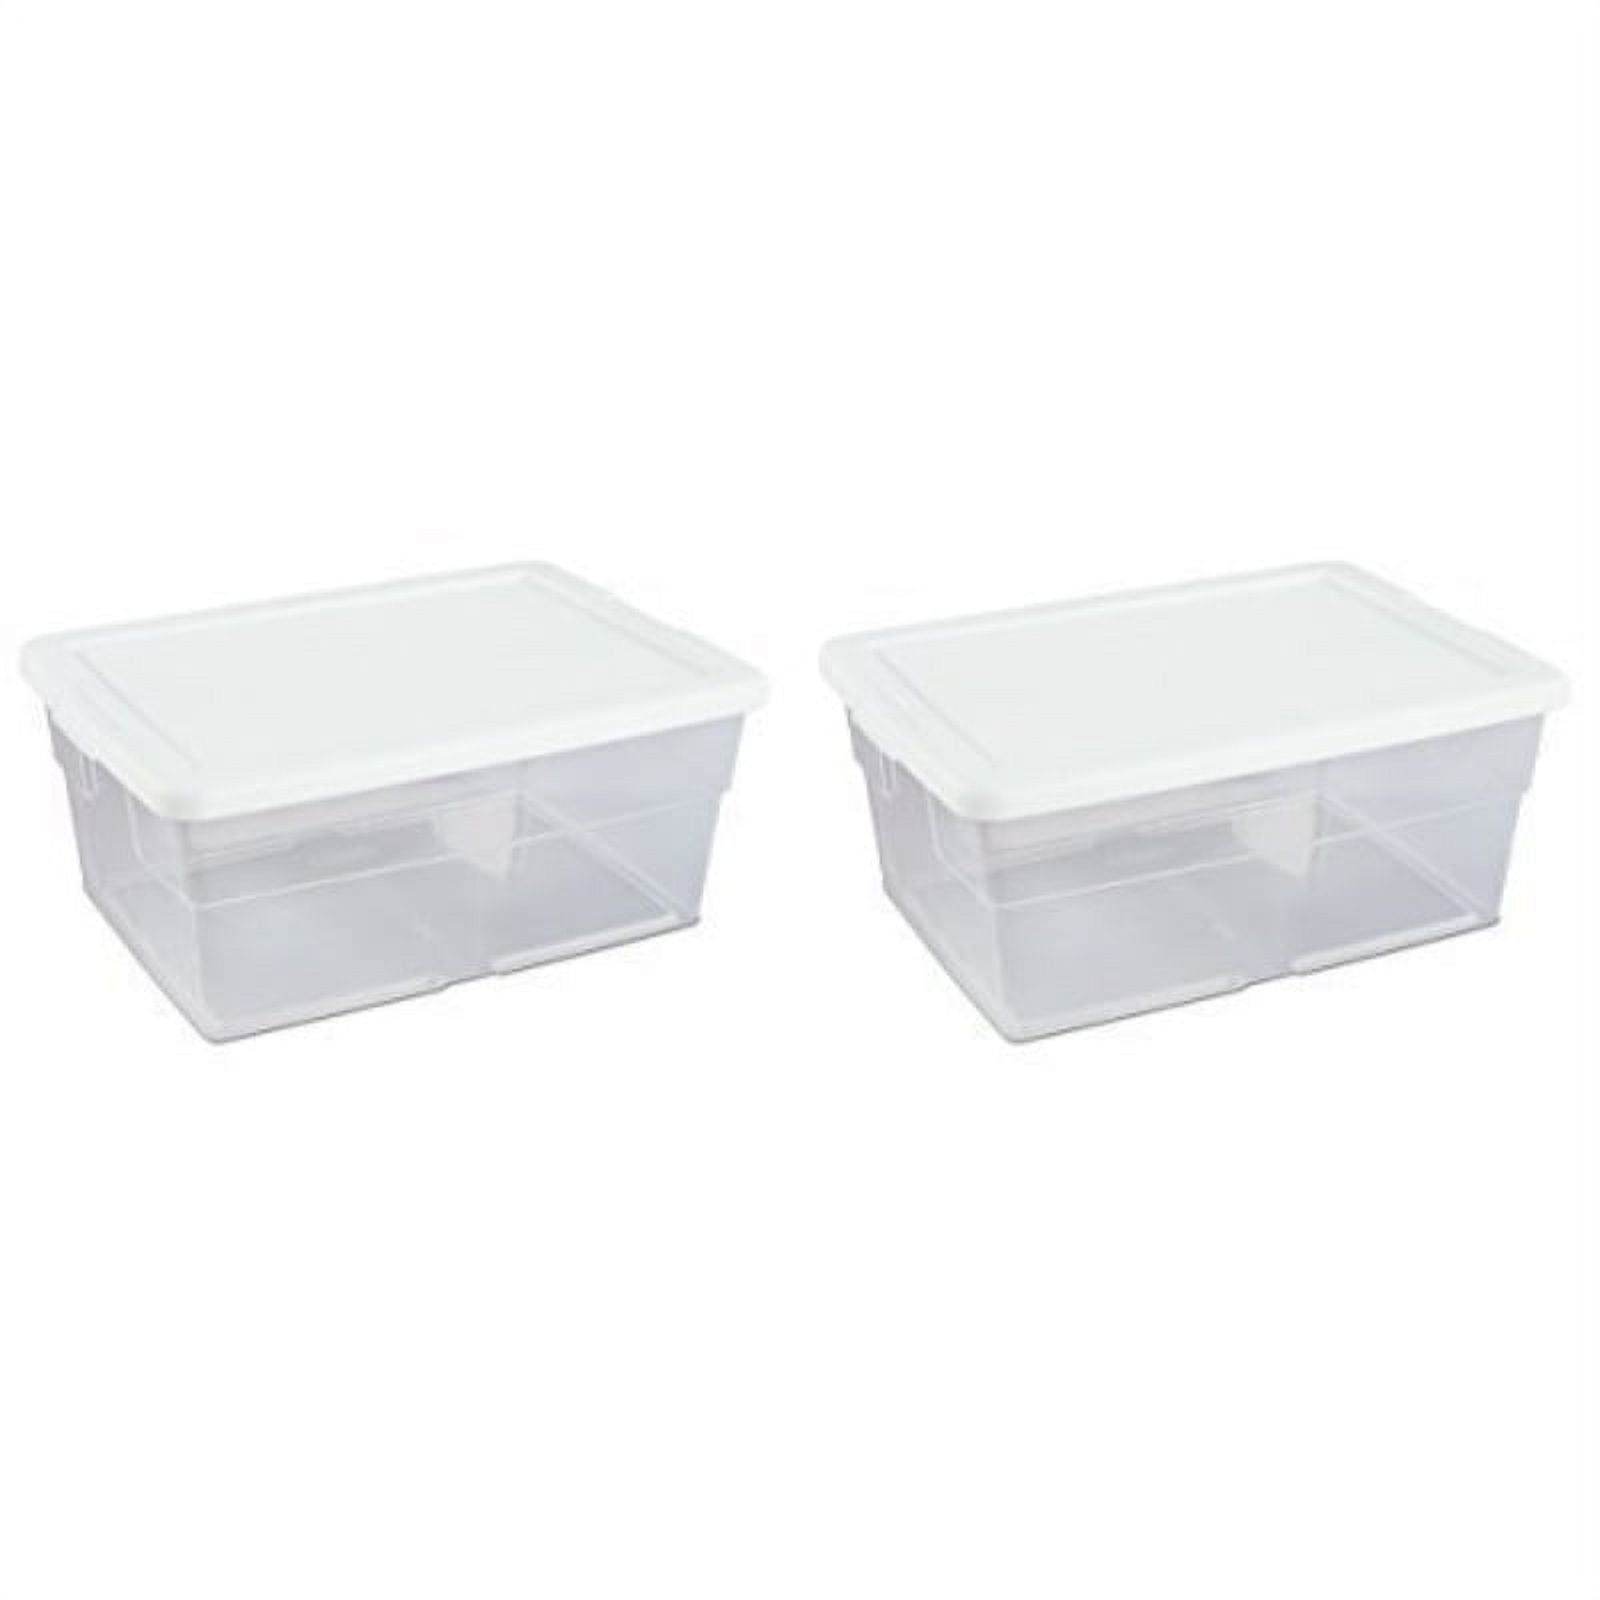 Sterilite 17416A04 60 Quart, 4-Pack Storage Box, Clear Base with Cement Lid